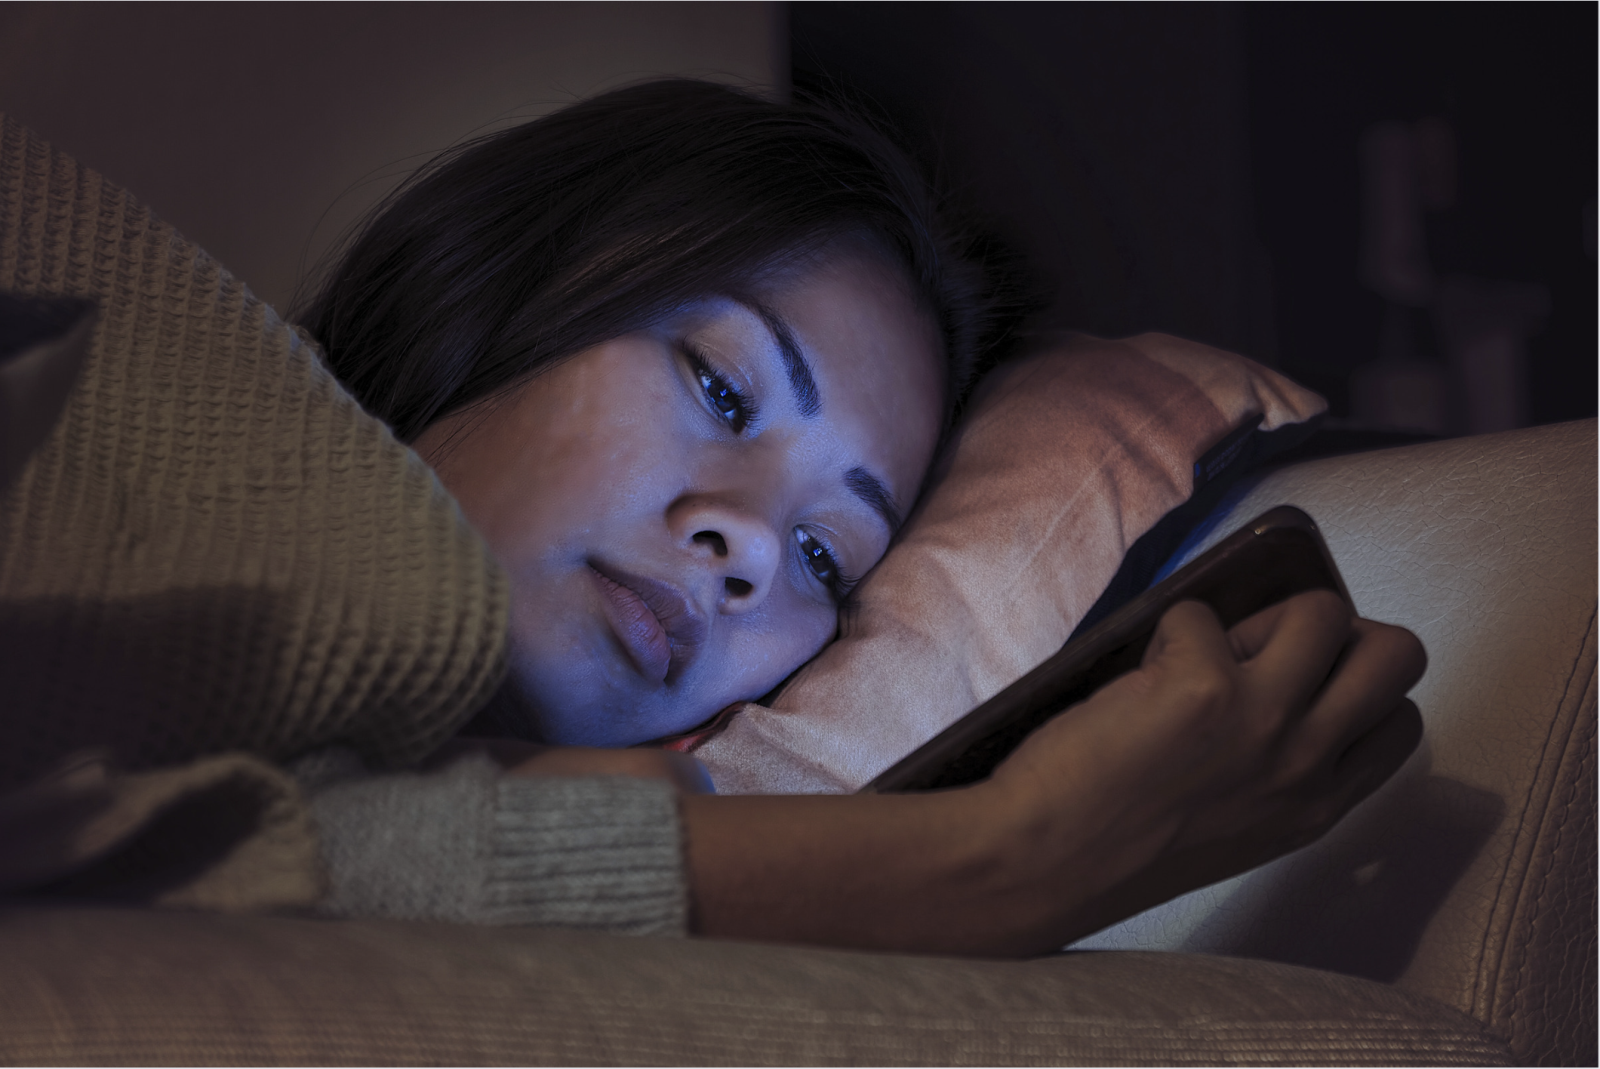 Sad woman looking at phone in bed